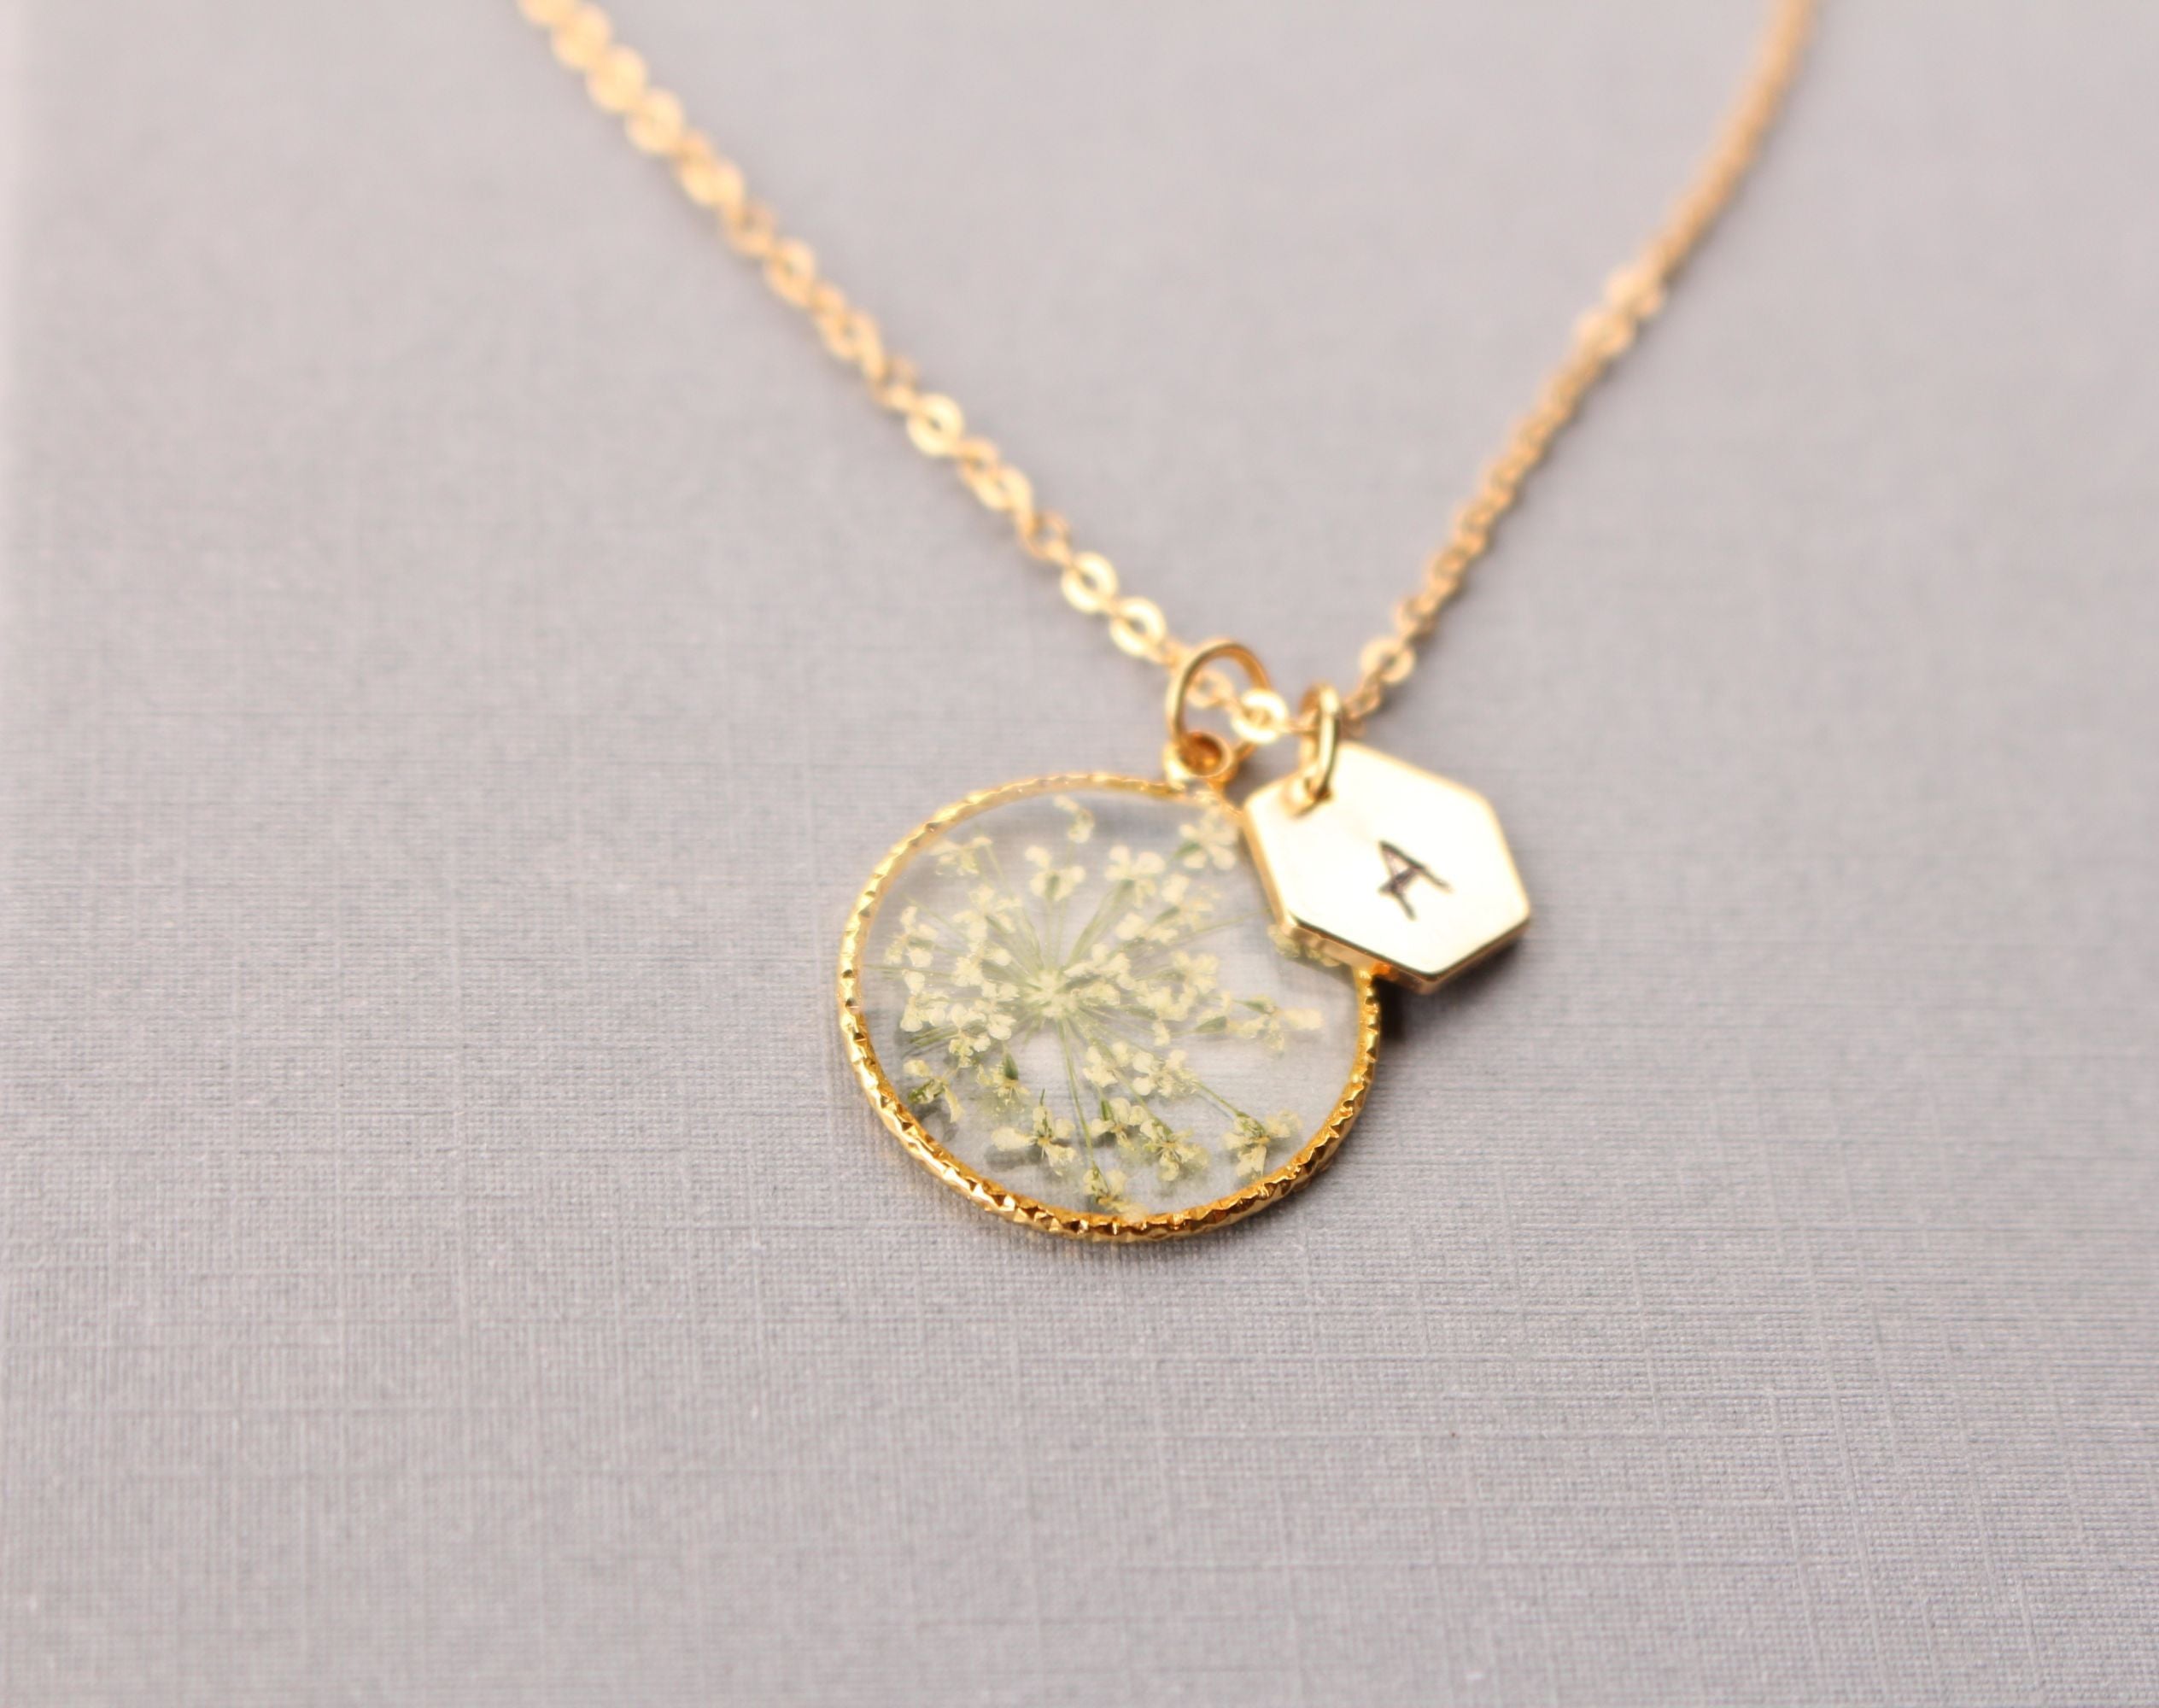 Fancy Initial Letter Pressed Flower Necklace